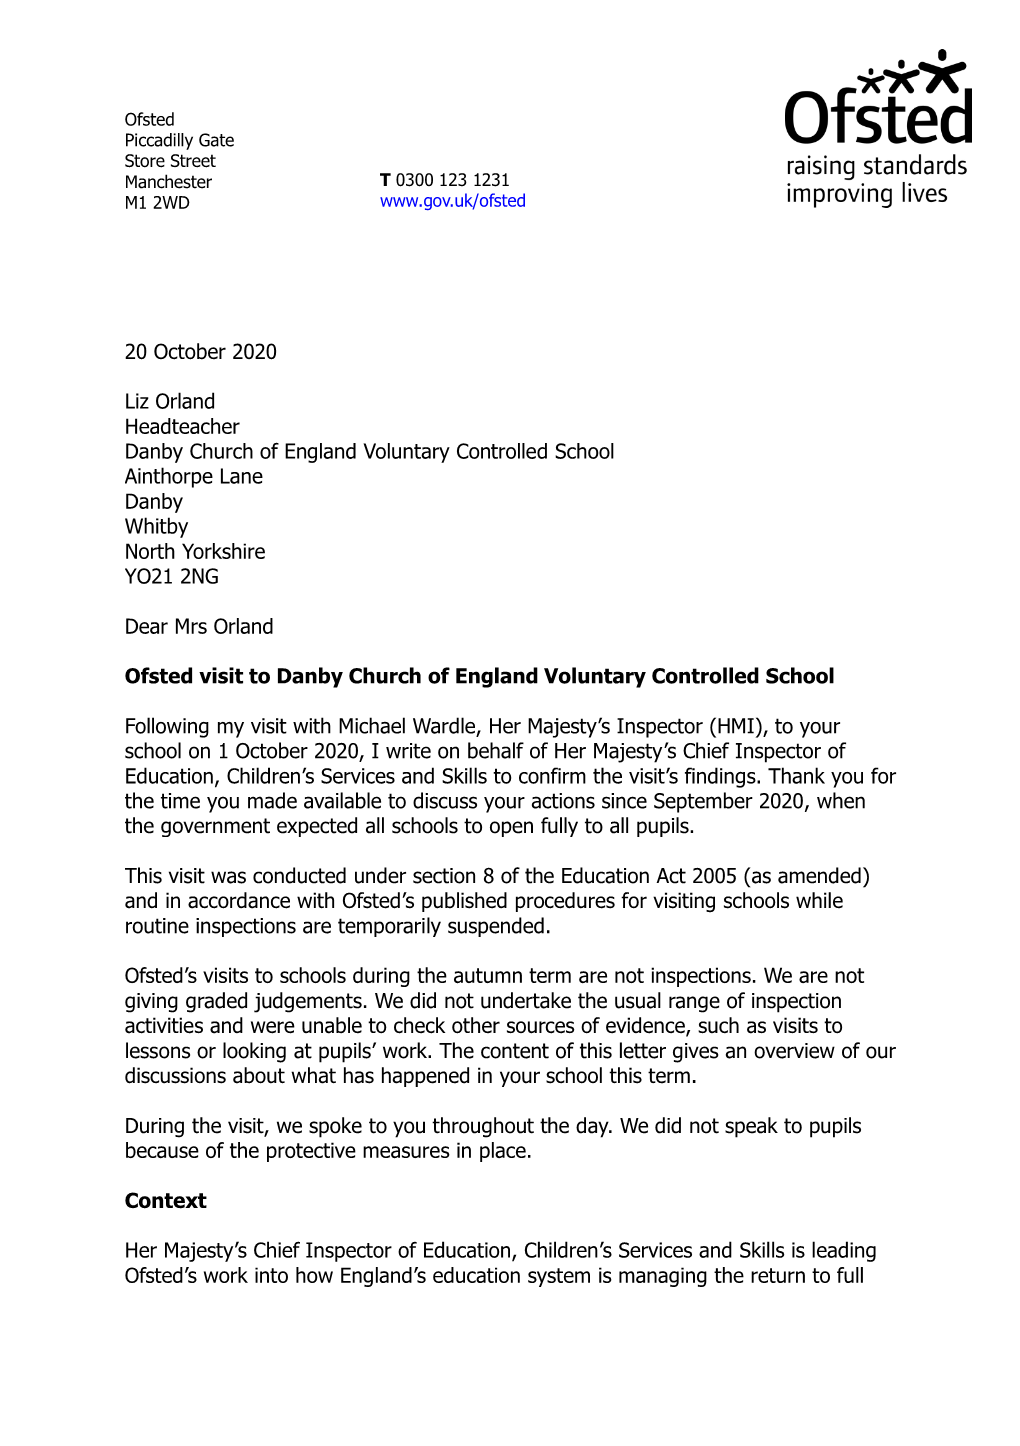 20 October 2020 Liz Orland Headteacher Danby Church of England Voluntary Controlled School Ainthorpe Lane Danby Whitby North